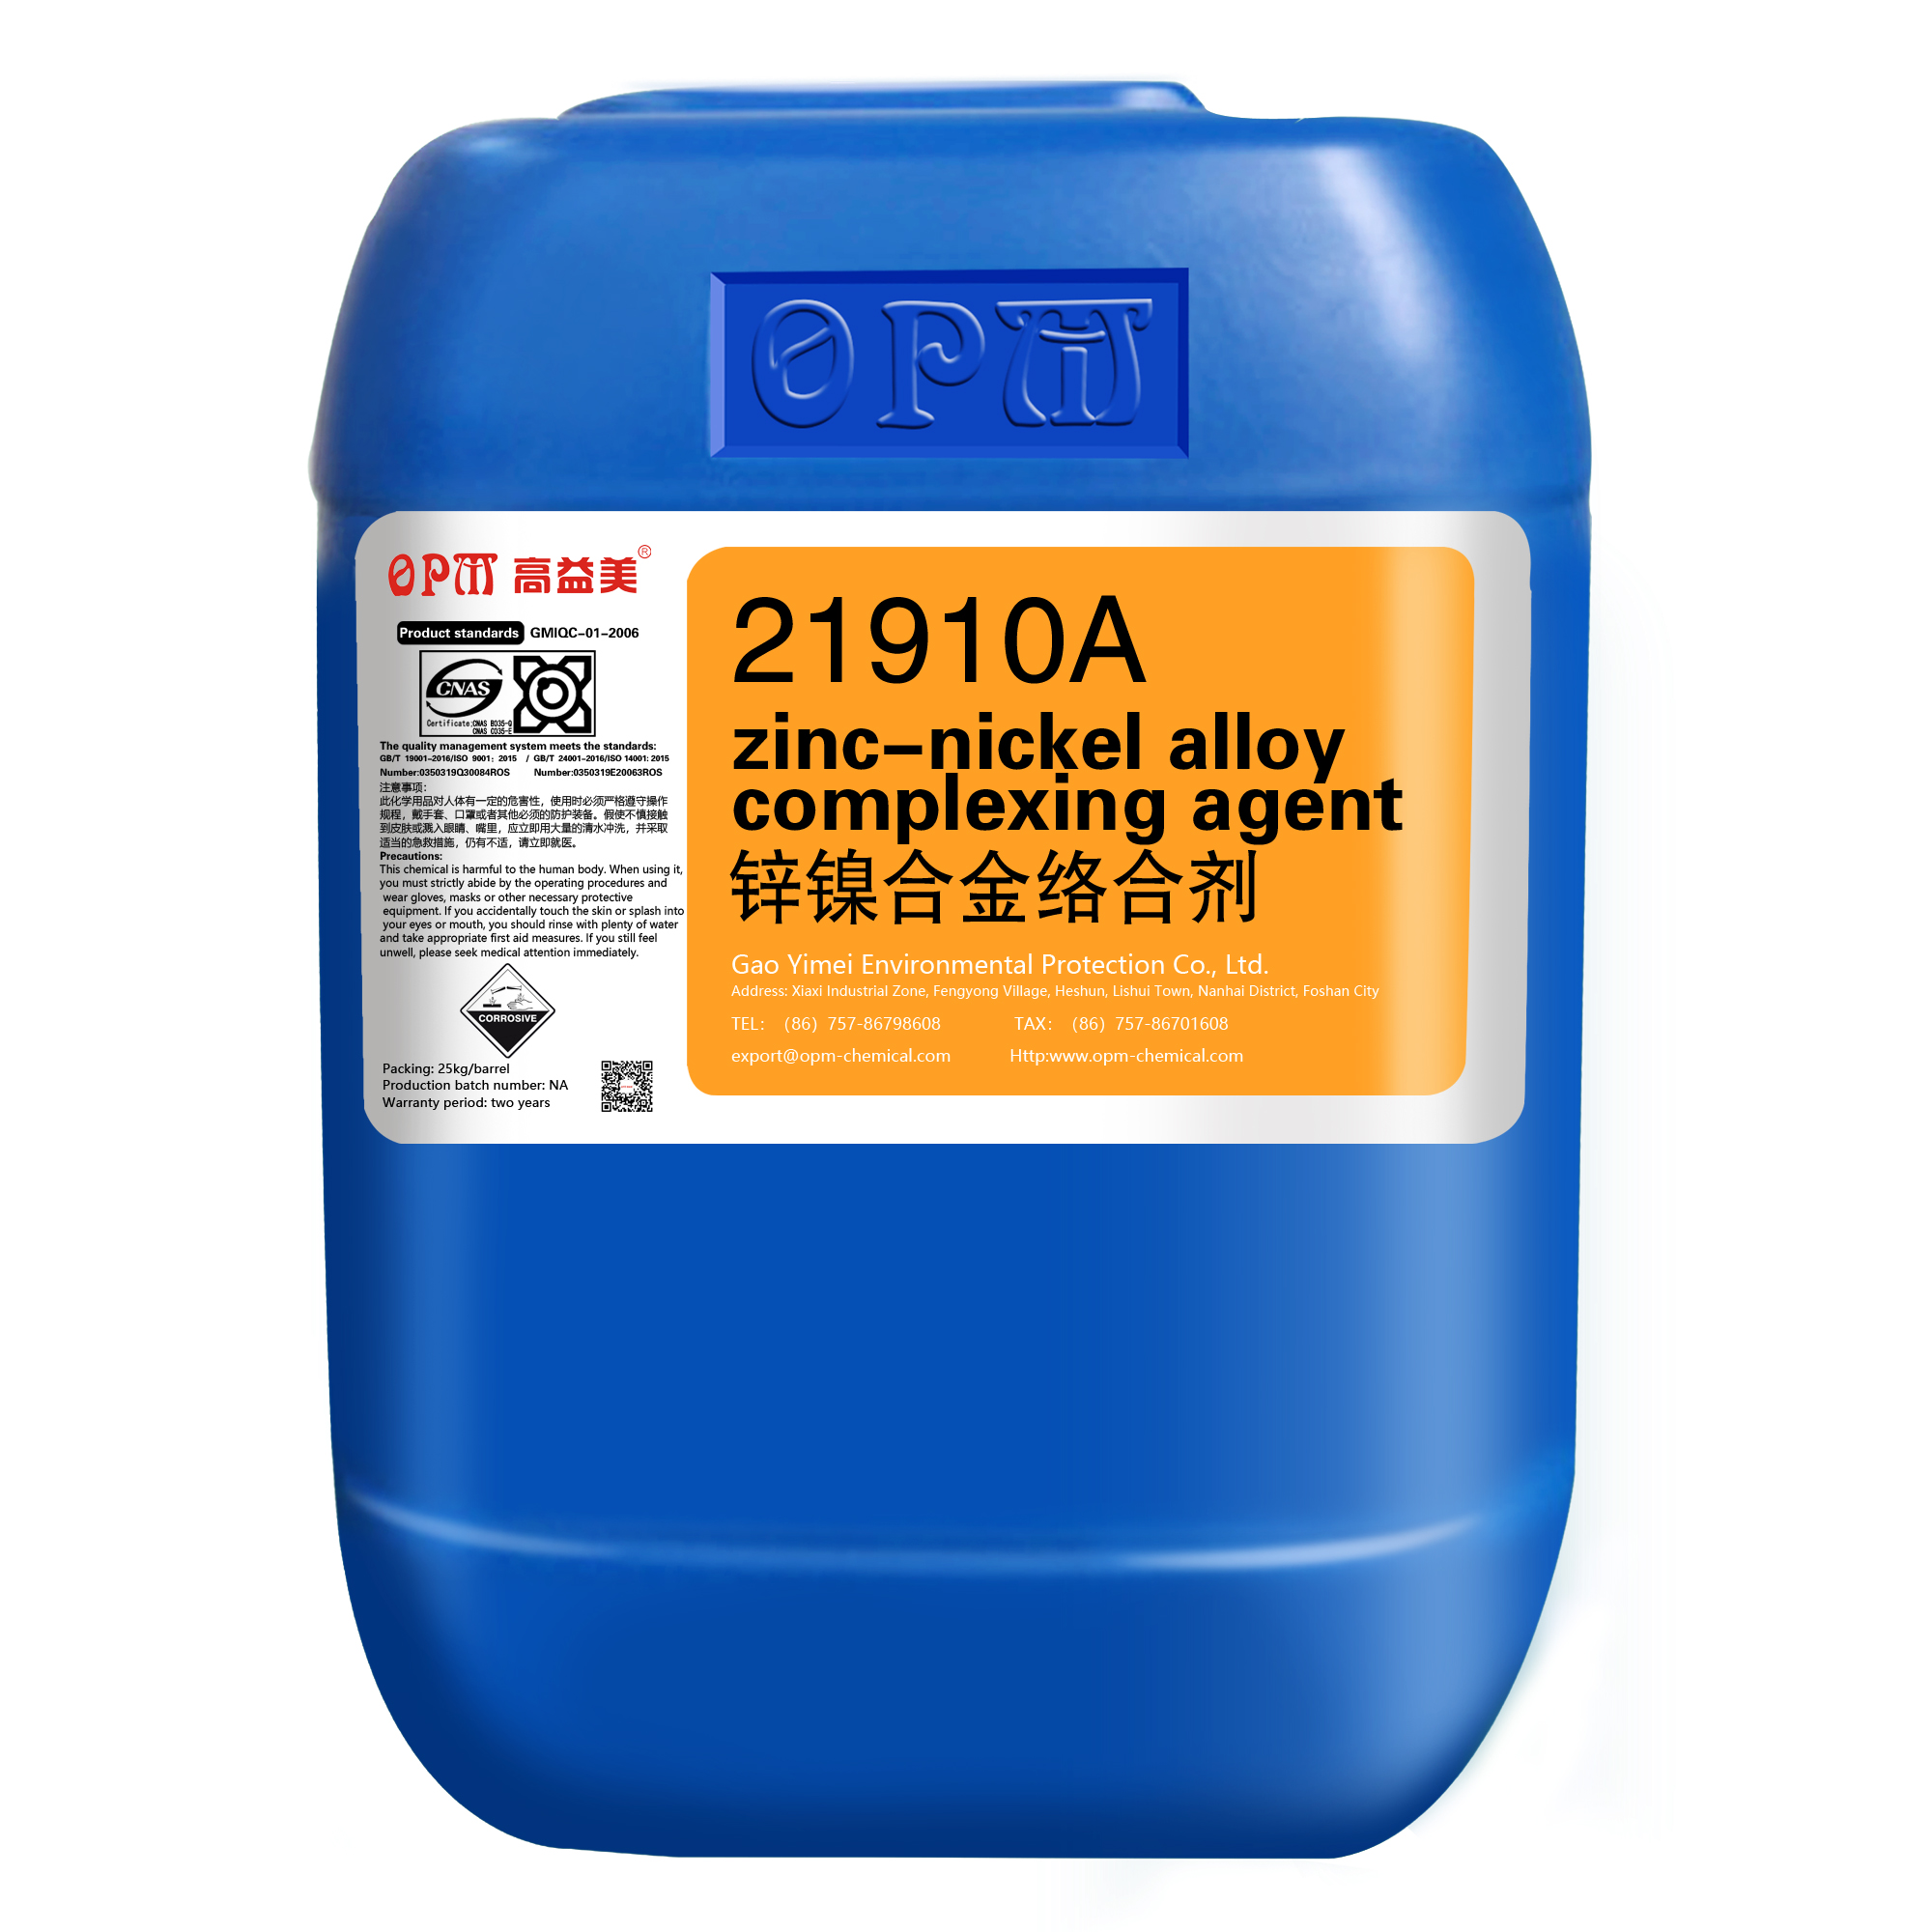 21910complexing agent for zinc-nickel alloy